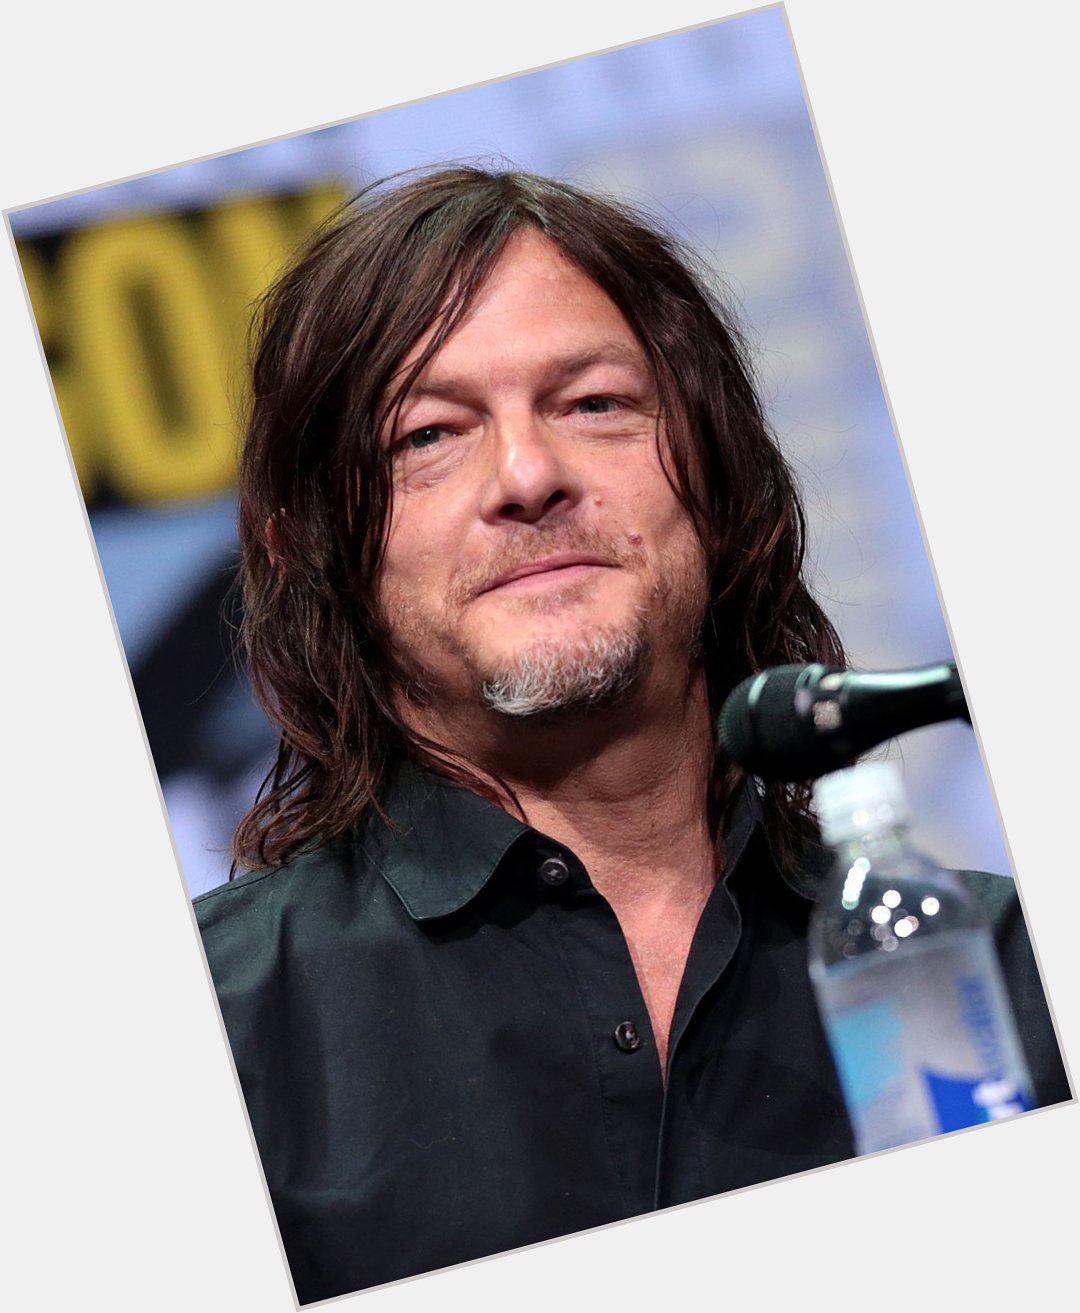 Happy 53rd birthday to Norman Reedus, who puts all the grime and charm into Daryl Dixon, from 